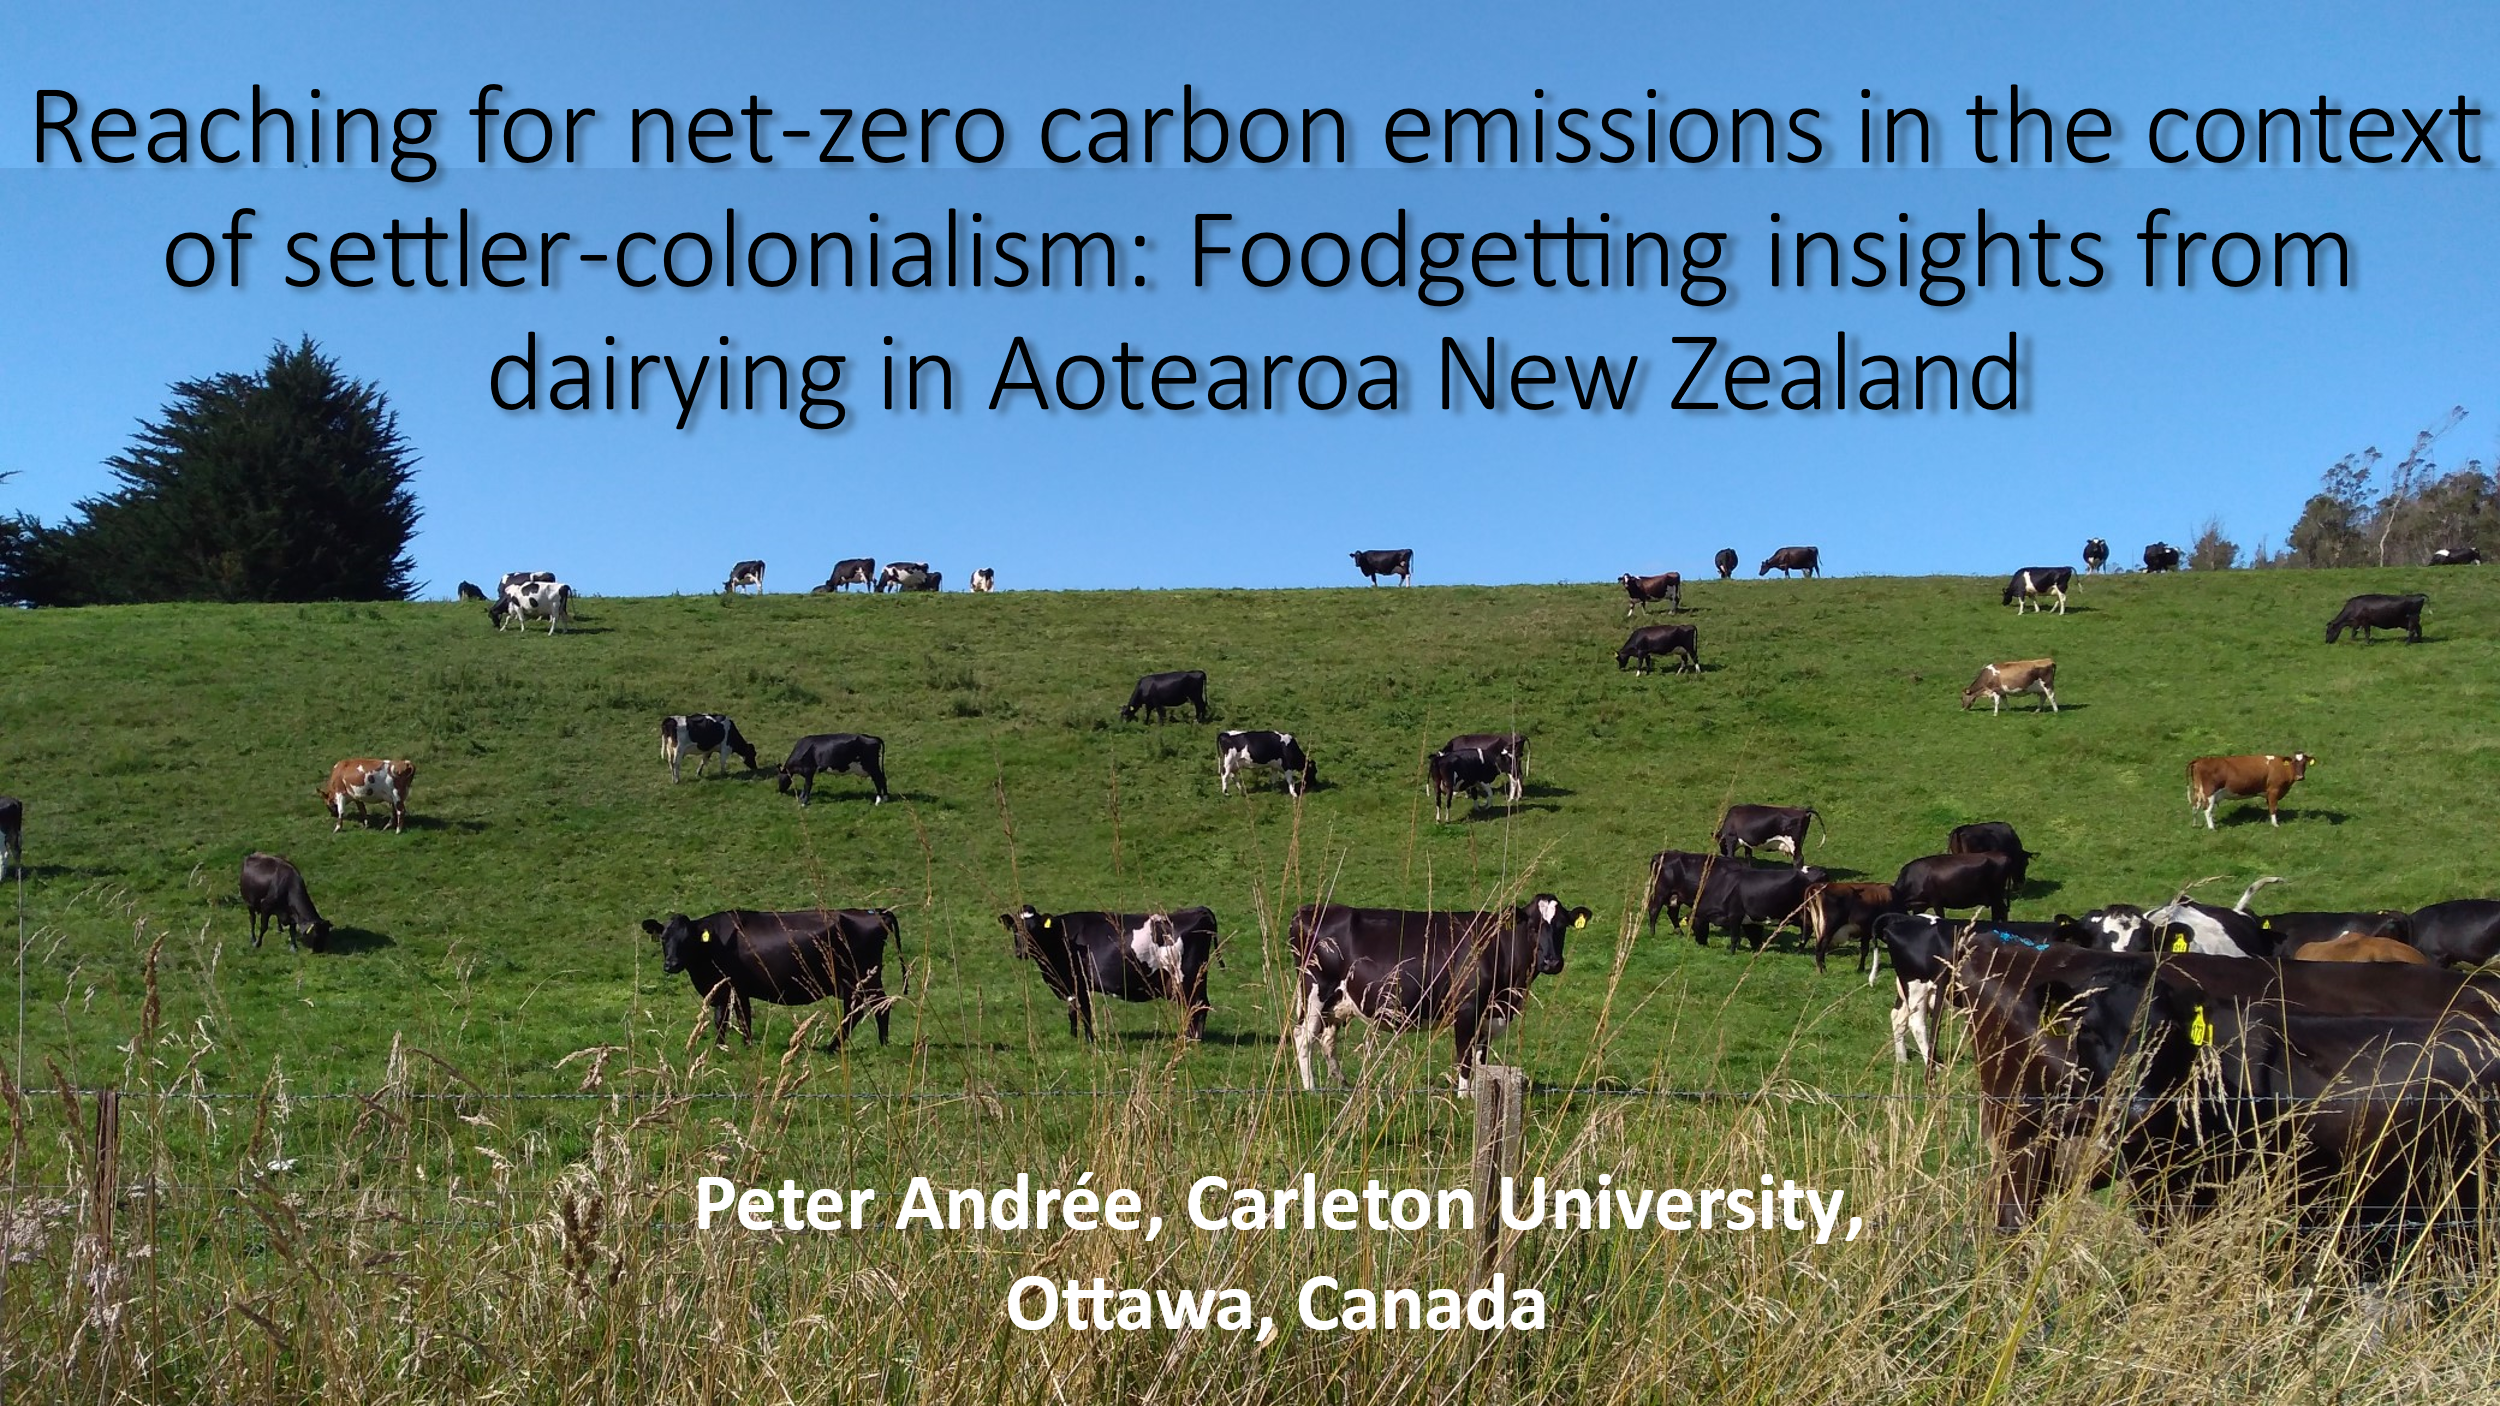 Reaching for net-zero carbon emissions in the context of settler-colonialism: Foodgetting insights from dairying in Aotearoa New Zealand